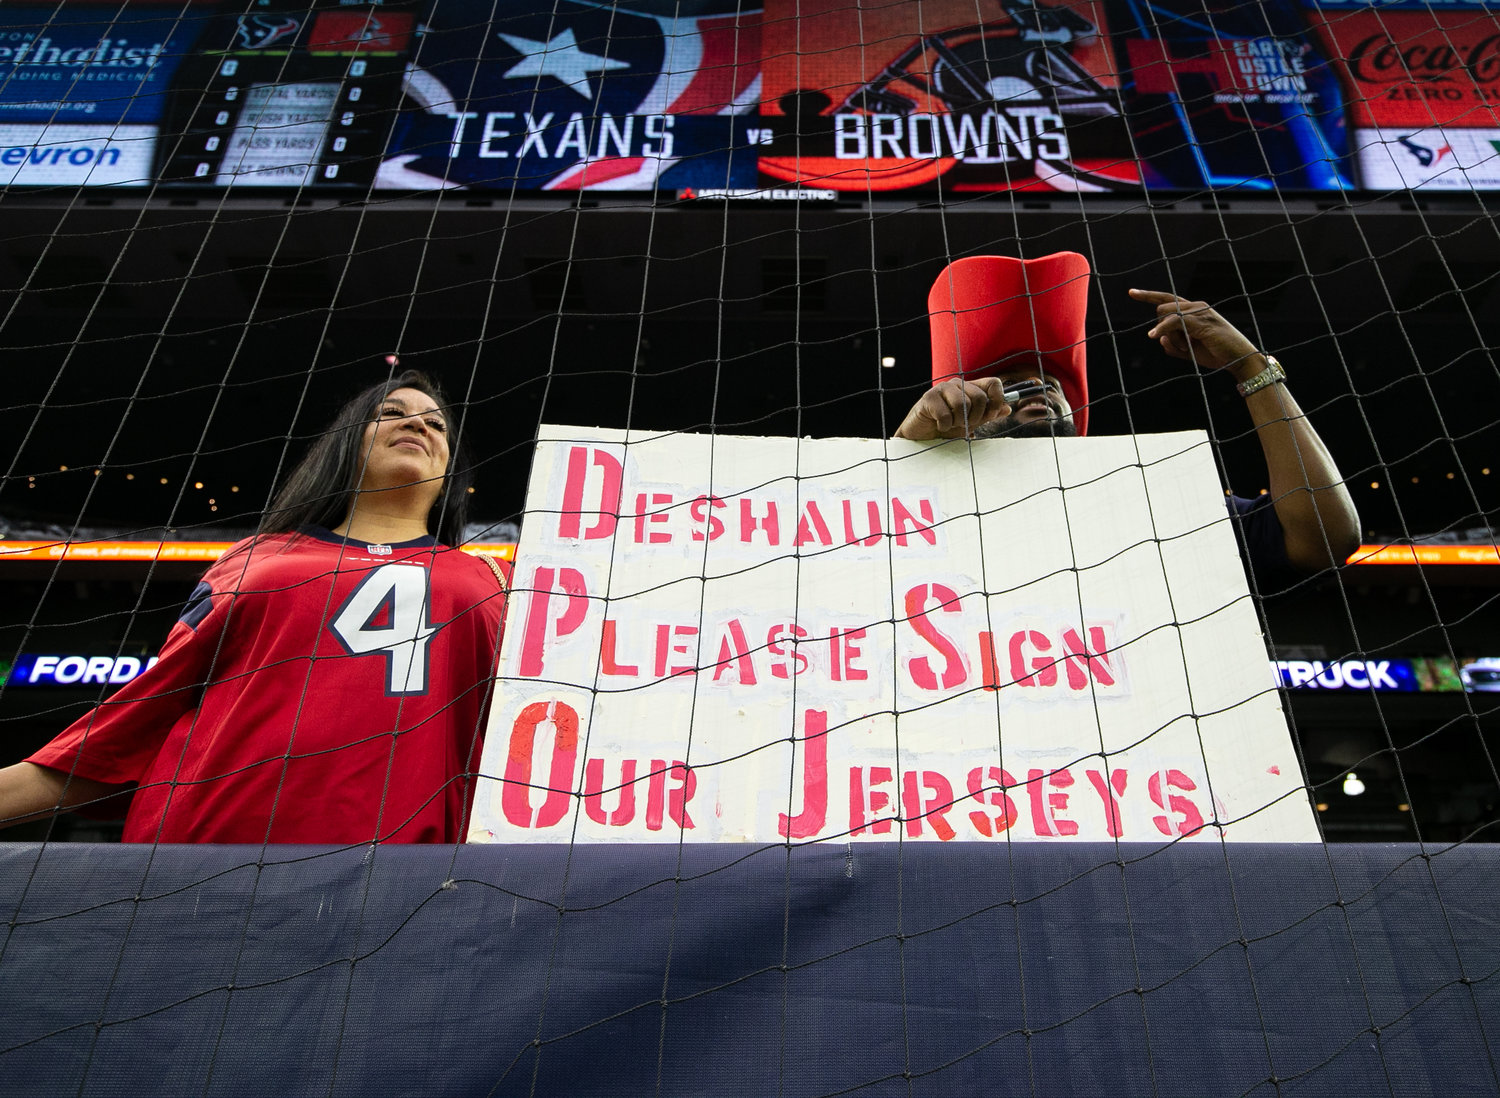 Houston Texans fans await an opportunity for former Texans quarterback Deshaun Watson, now with the Browns, to sign autographs before an NFL game on Dec. 4, 2022, in Houston. The game marks the controversial quarterback’s return to Houston and first game back after an 11-game suspension for allegations of sexual misconduct during his tenure with the Texans.